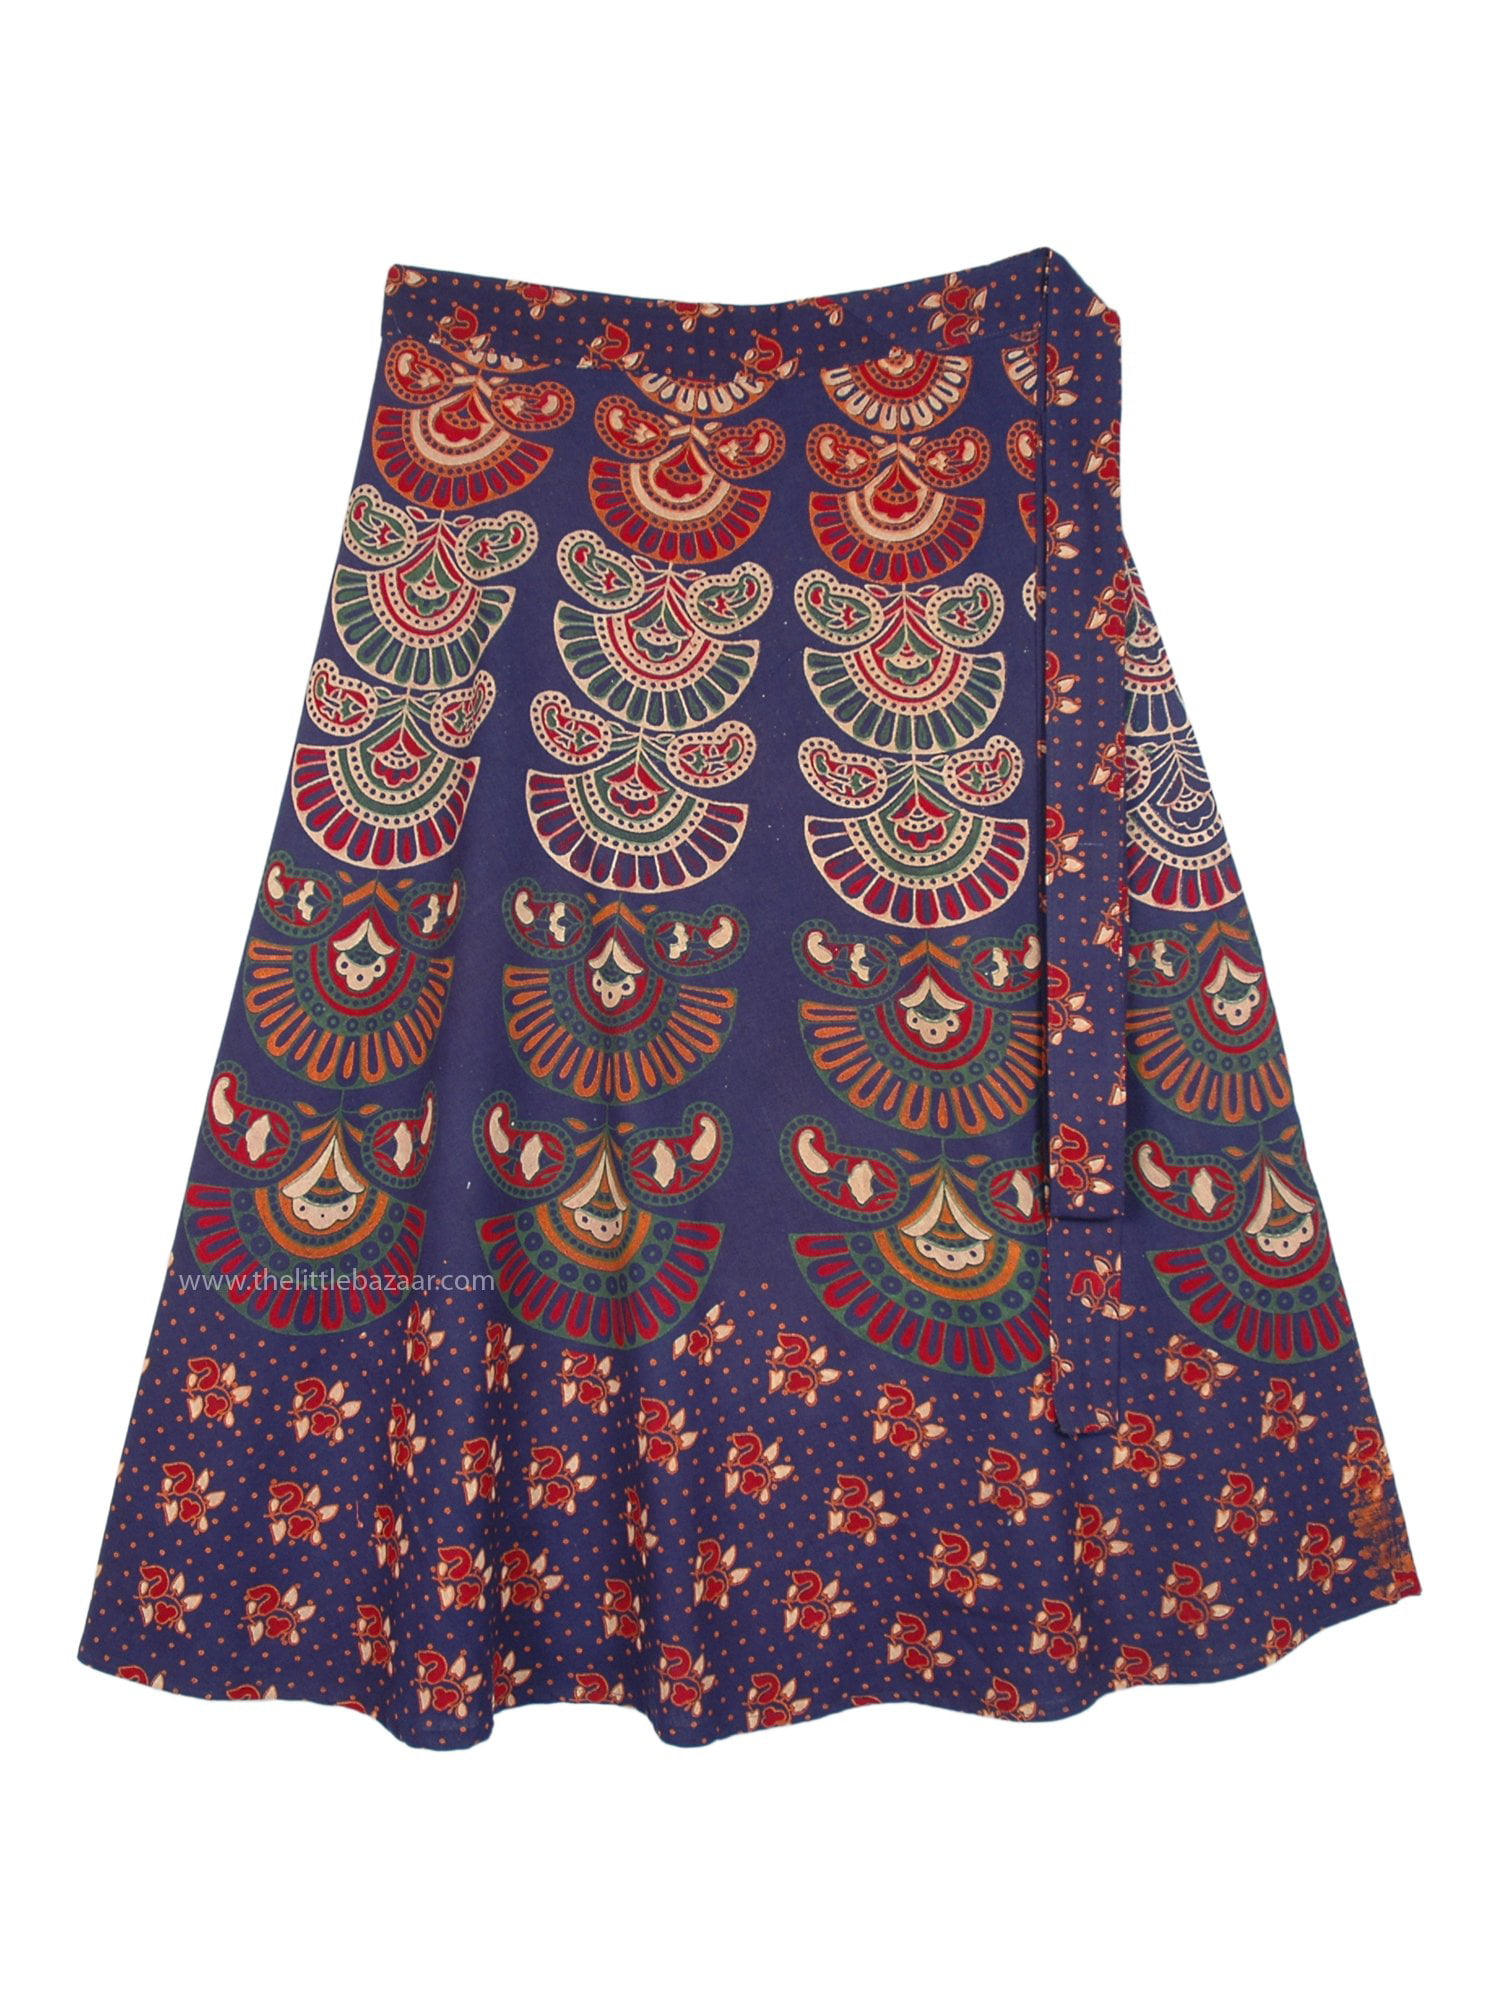 Discover more than 261 blue skirt ethnic super hot